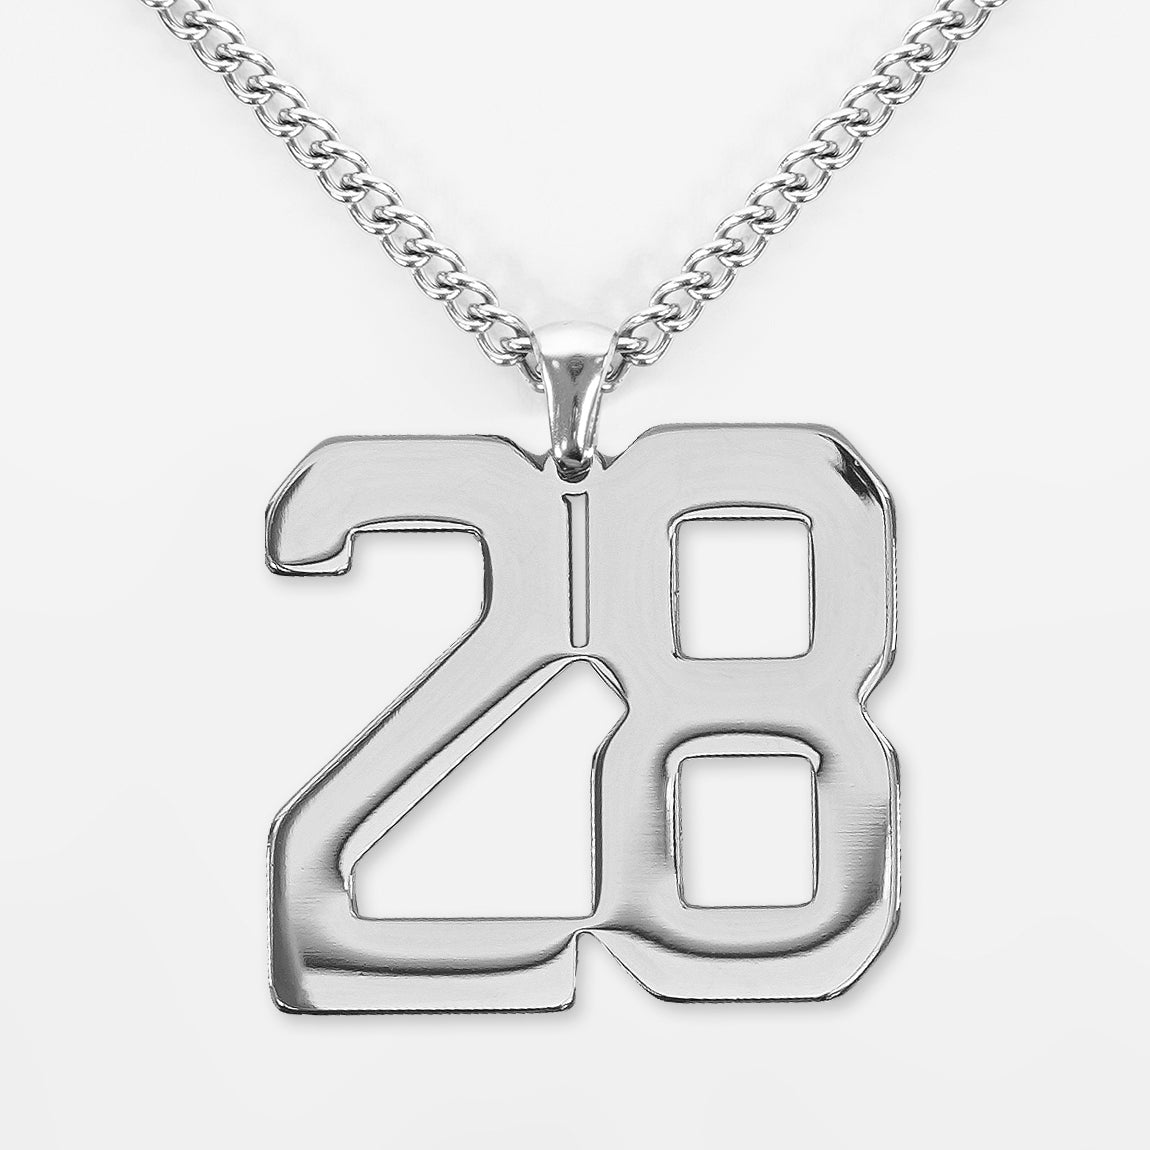 28 Number Pendant with Chain Necklace - Stainless Steel